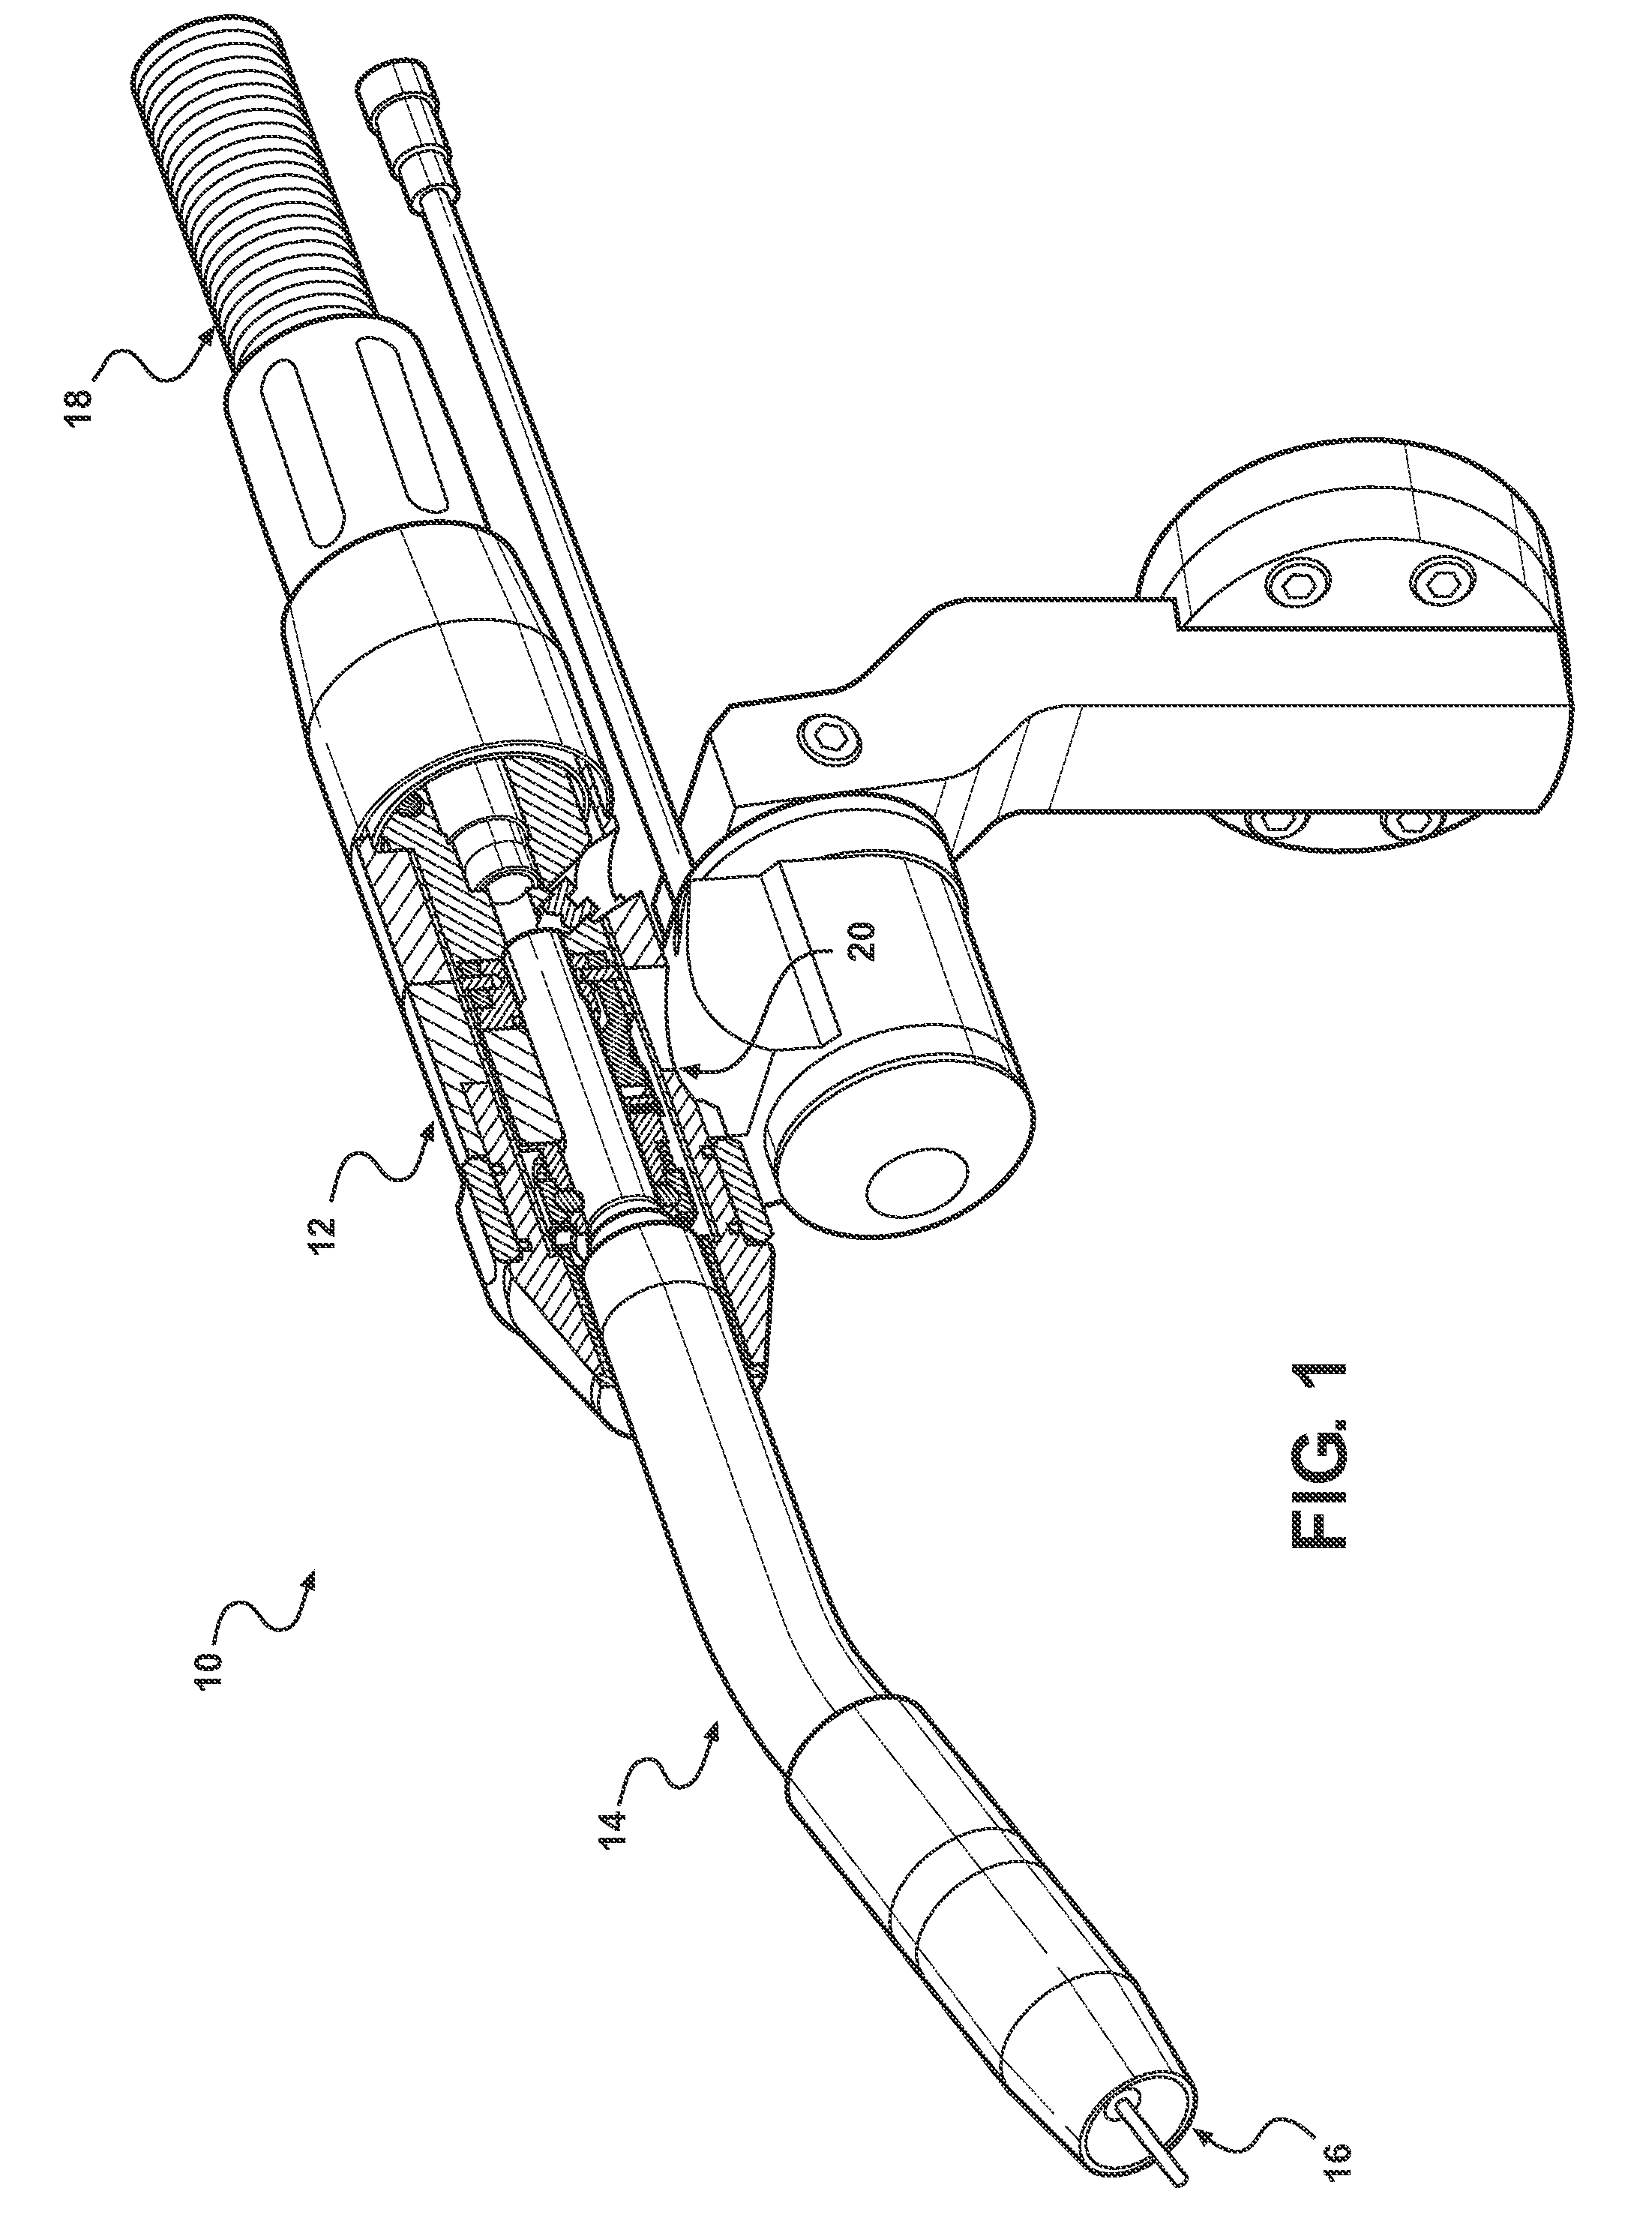 Robotic gmaw torch with quick release gooseneck locking mechanism, dual alignment features, and multiple electrical contacts